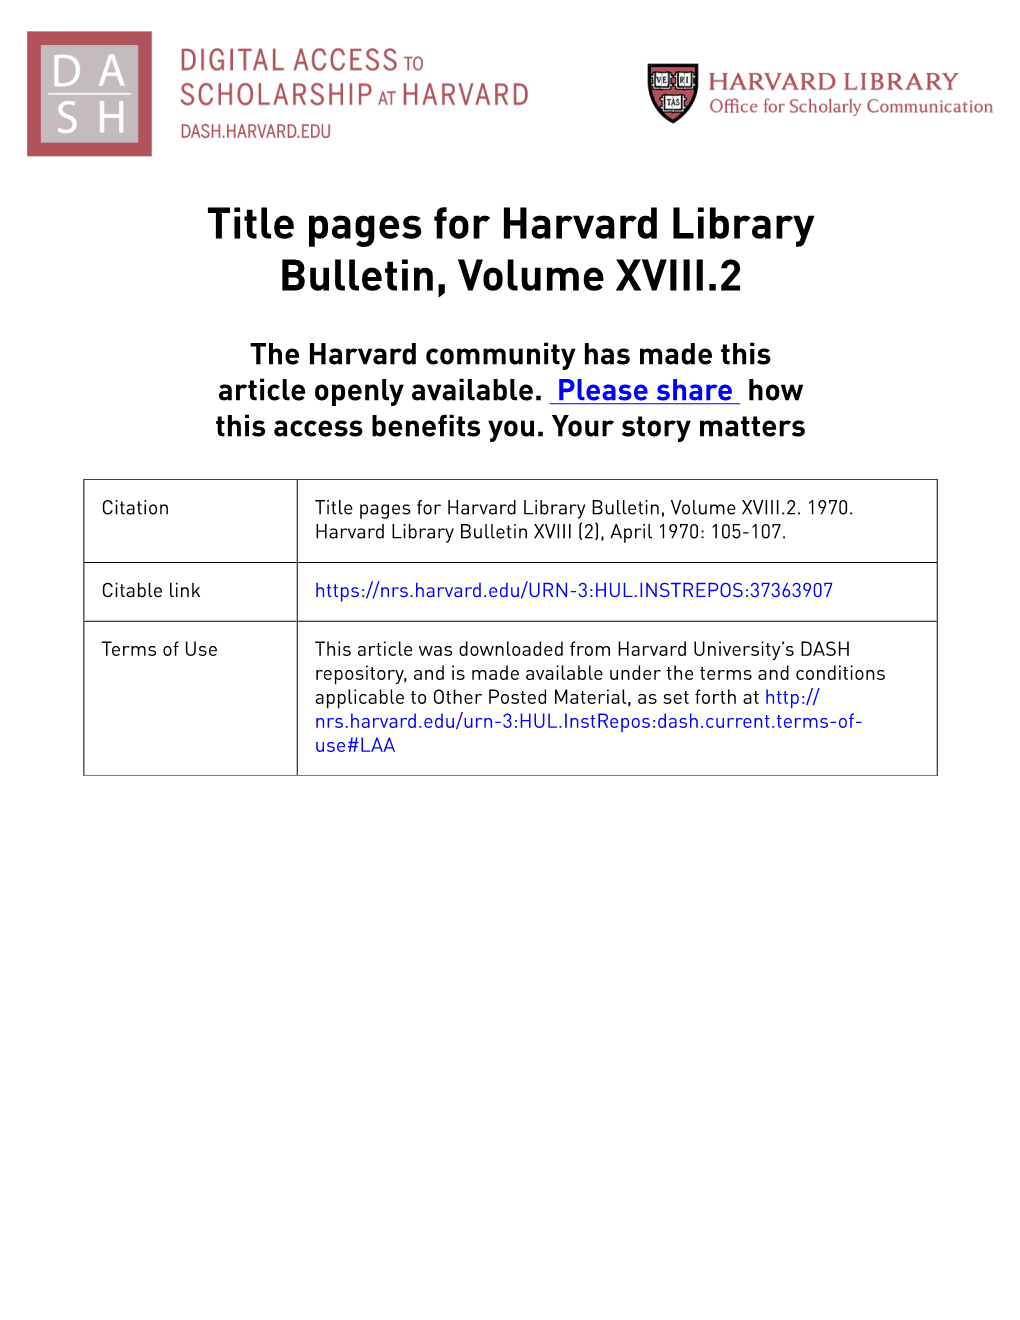 Title Pages for Harvard Library Bulletin, Volume XVIII.2